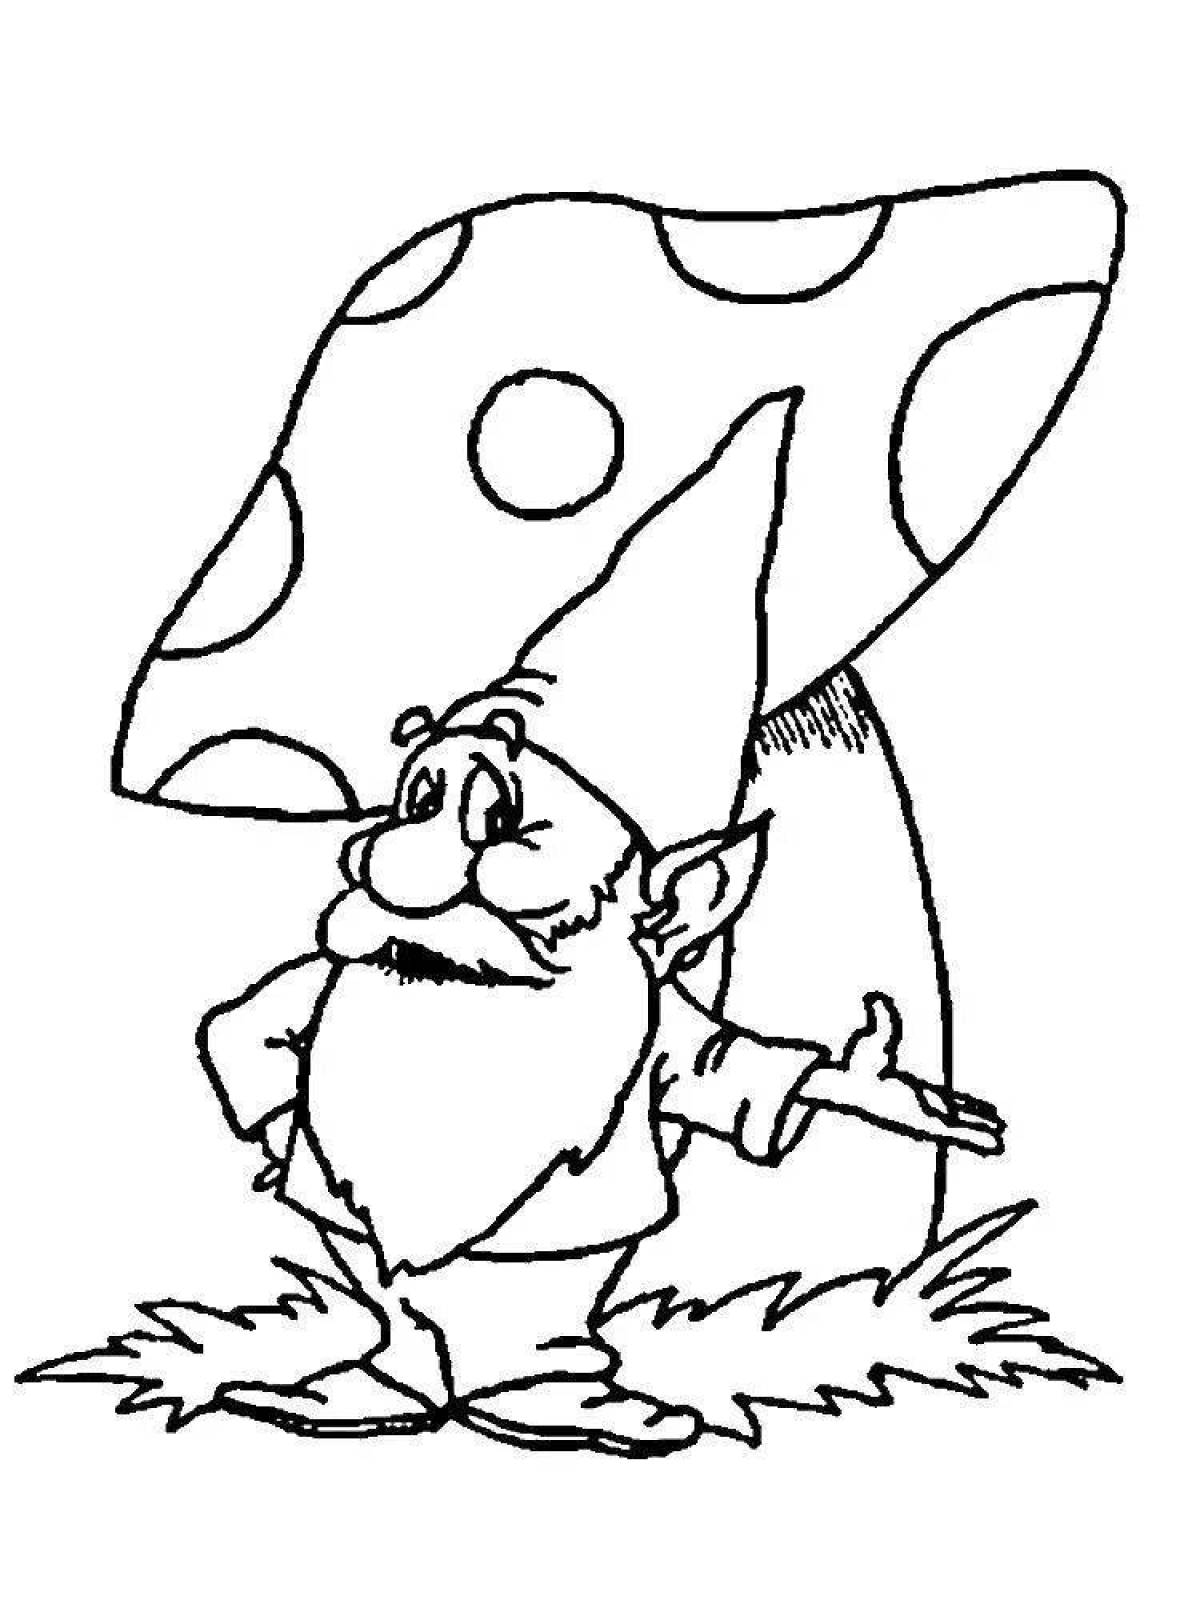 Fancy gnome coloring for kids